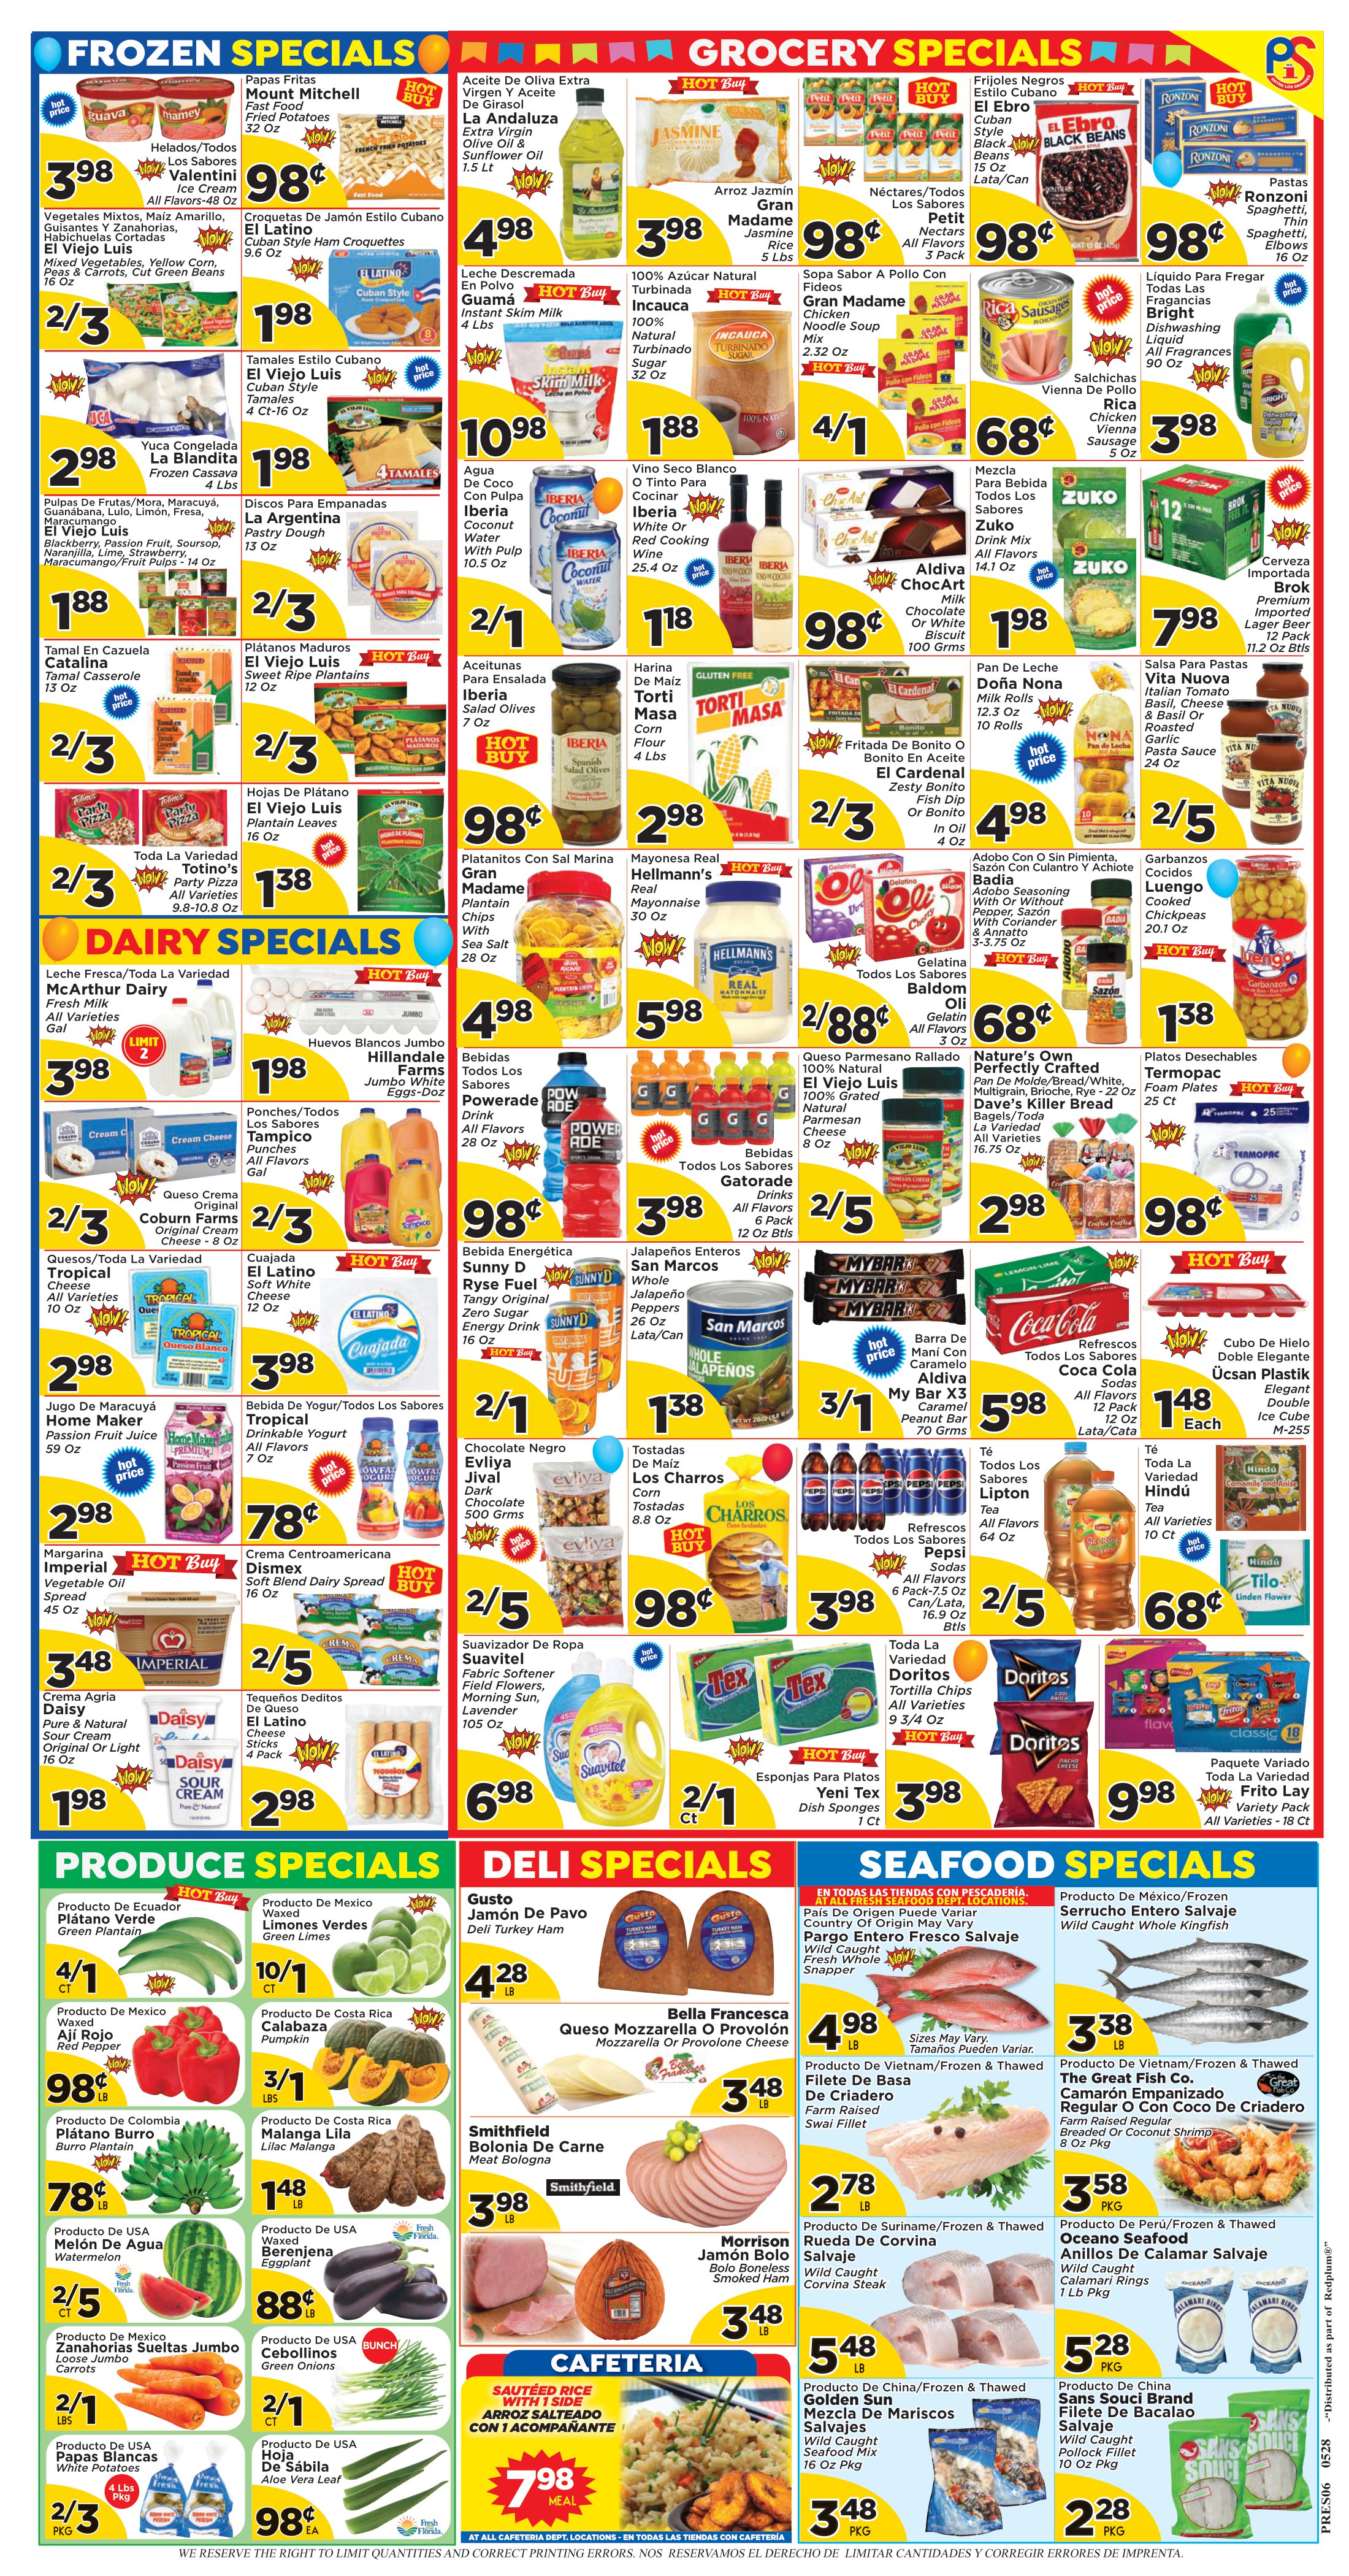 Presidente Supermarket - Weekly Promo for Stores 6 Page 2